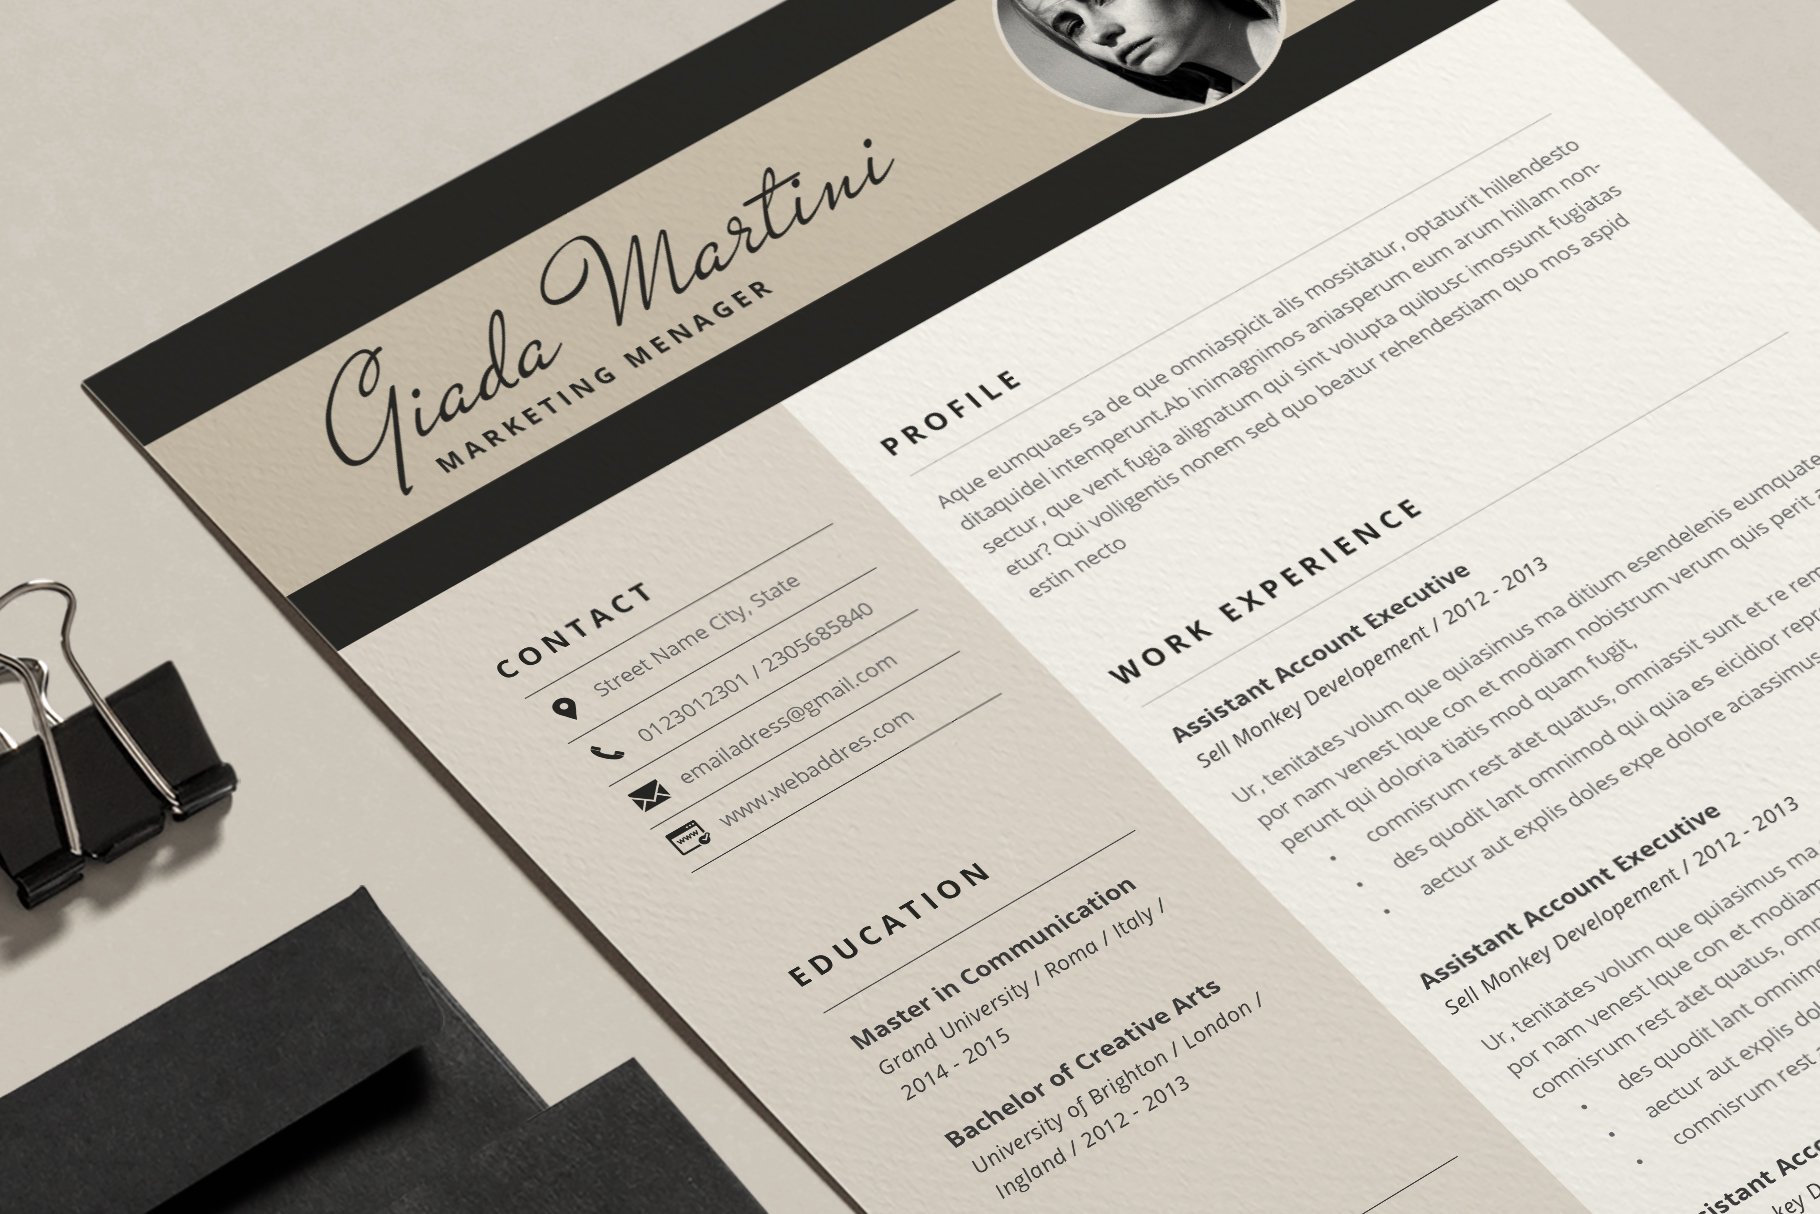 Clean and professional resume is displayed on a desk.